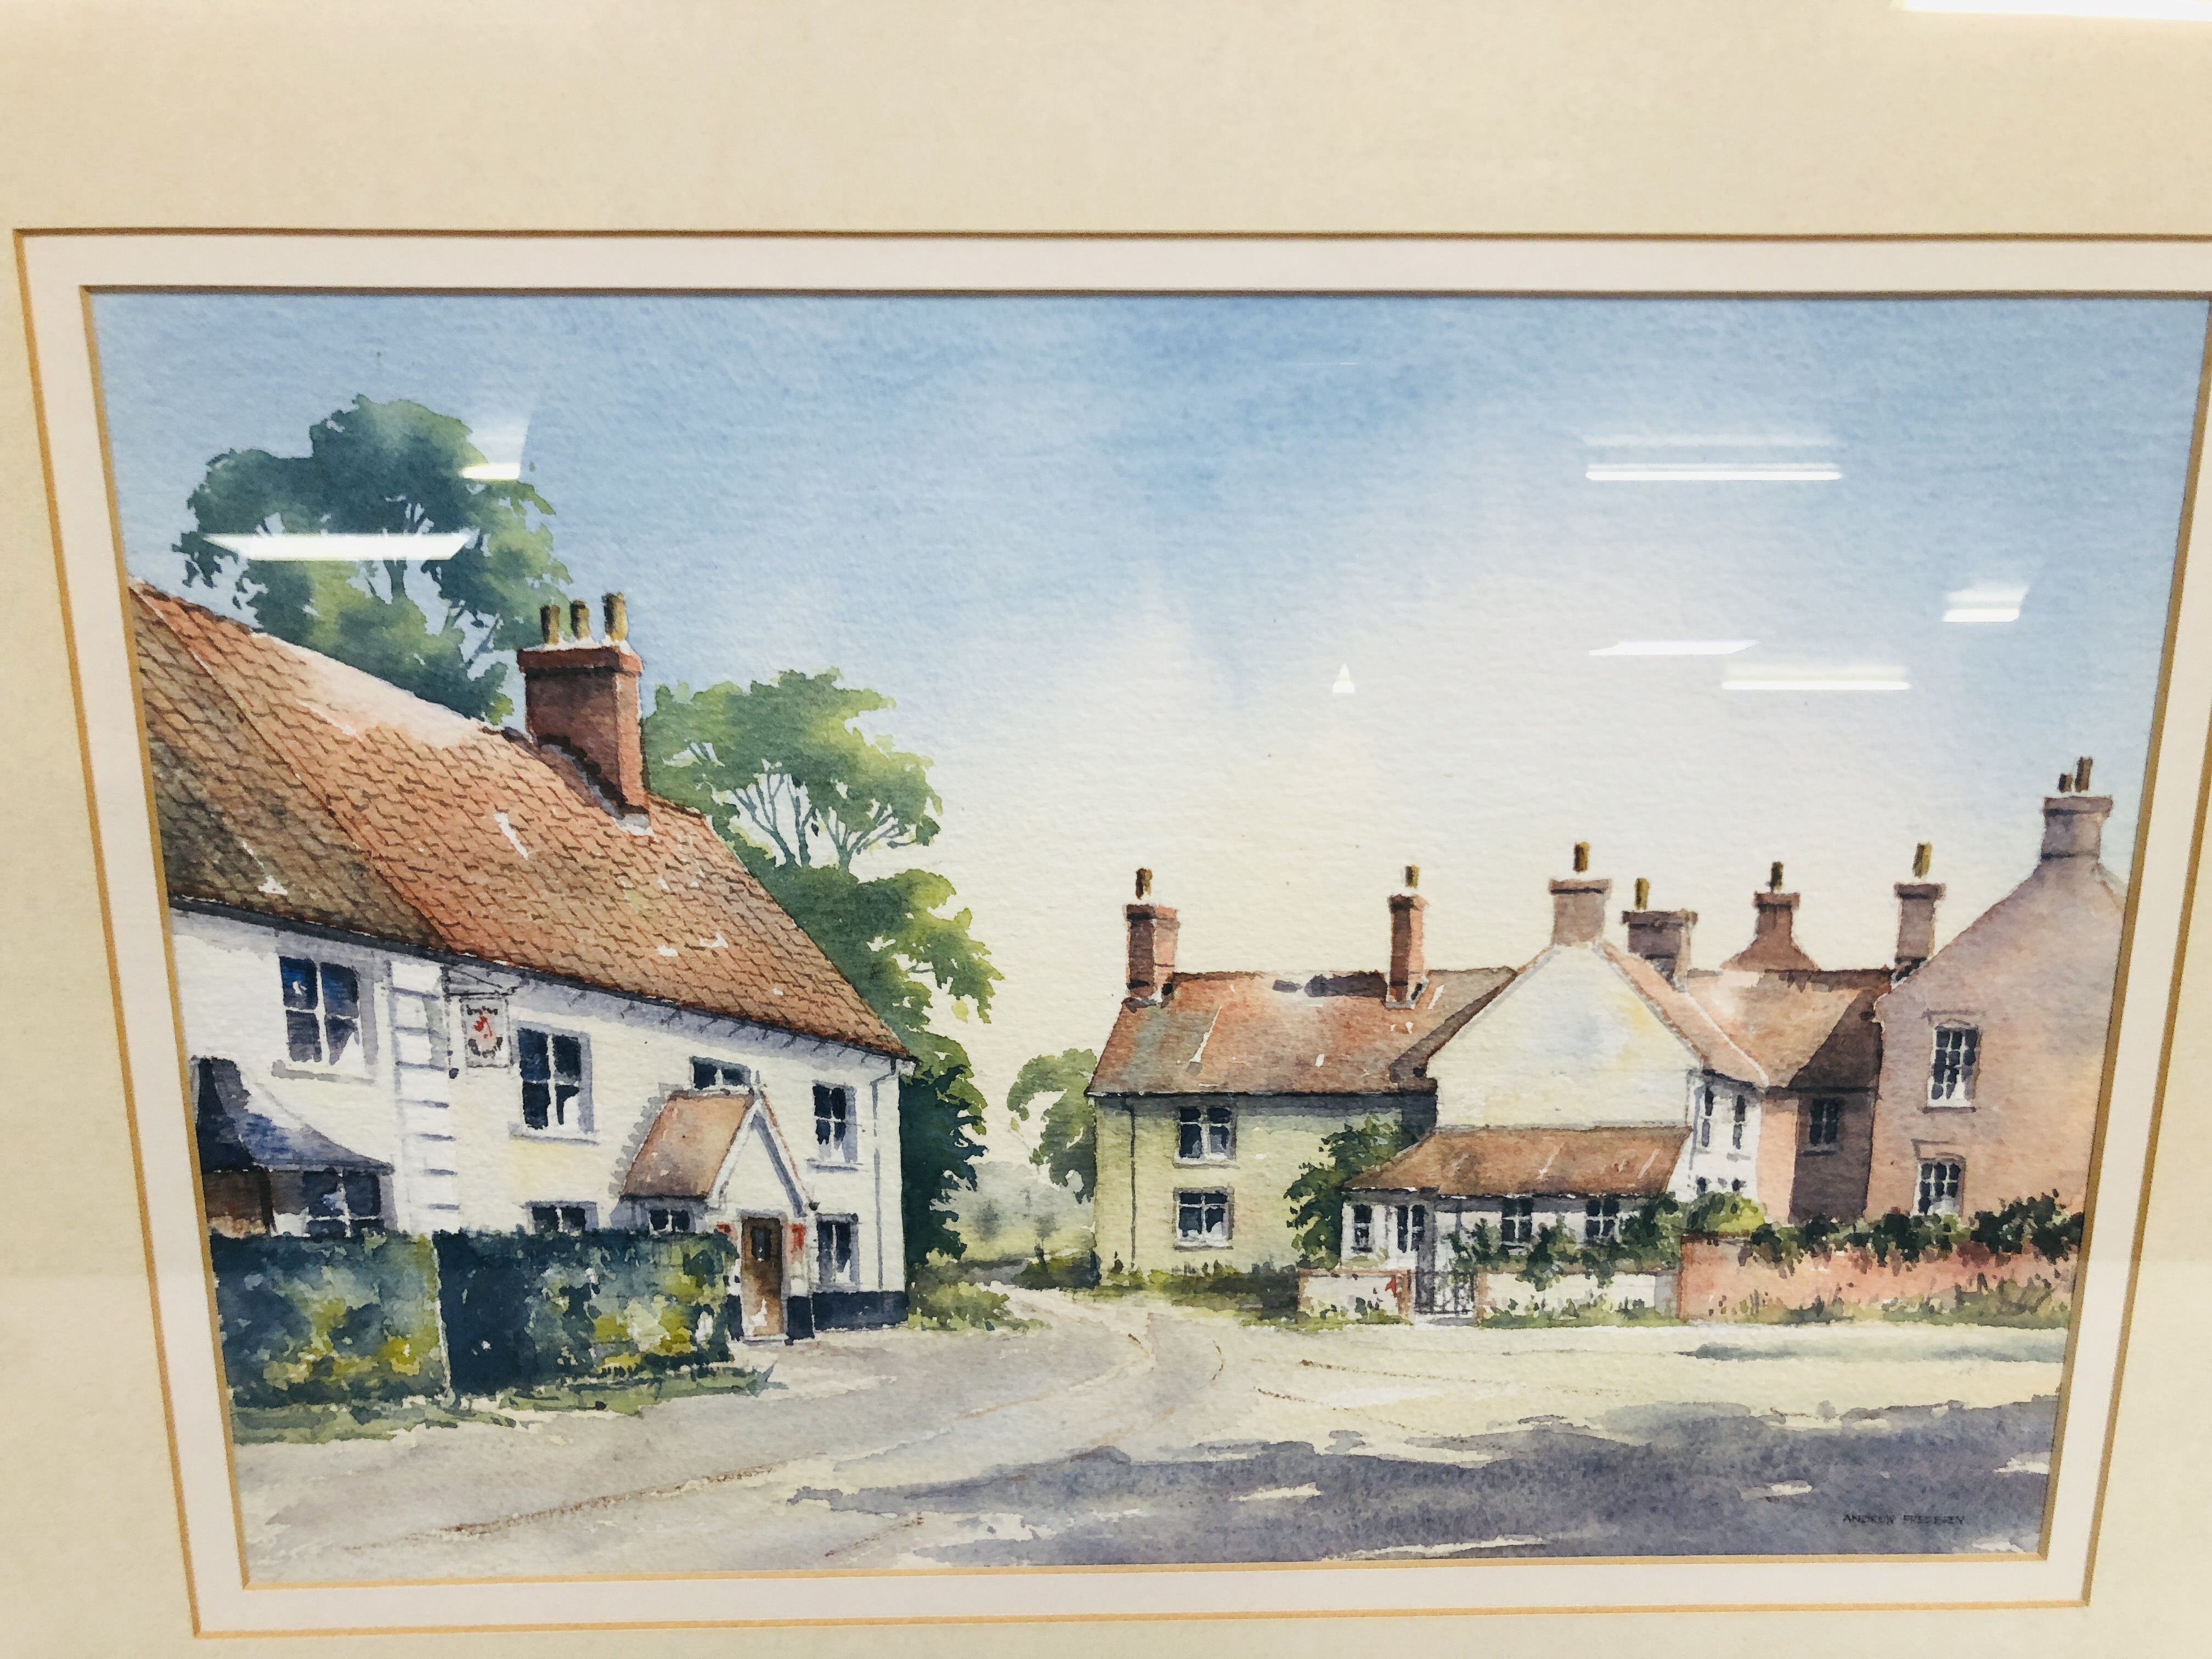 WATERCOLOUR "LYNG COURTYARD NORFOLK" BEARING SIGNATURE ANDREW FREEBURY HEIGHT 24CM. WIDTH 35.5CM. - Image 2 of 4